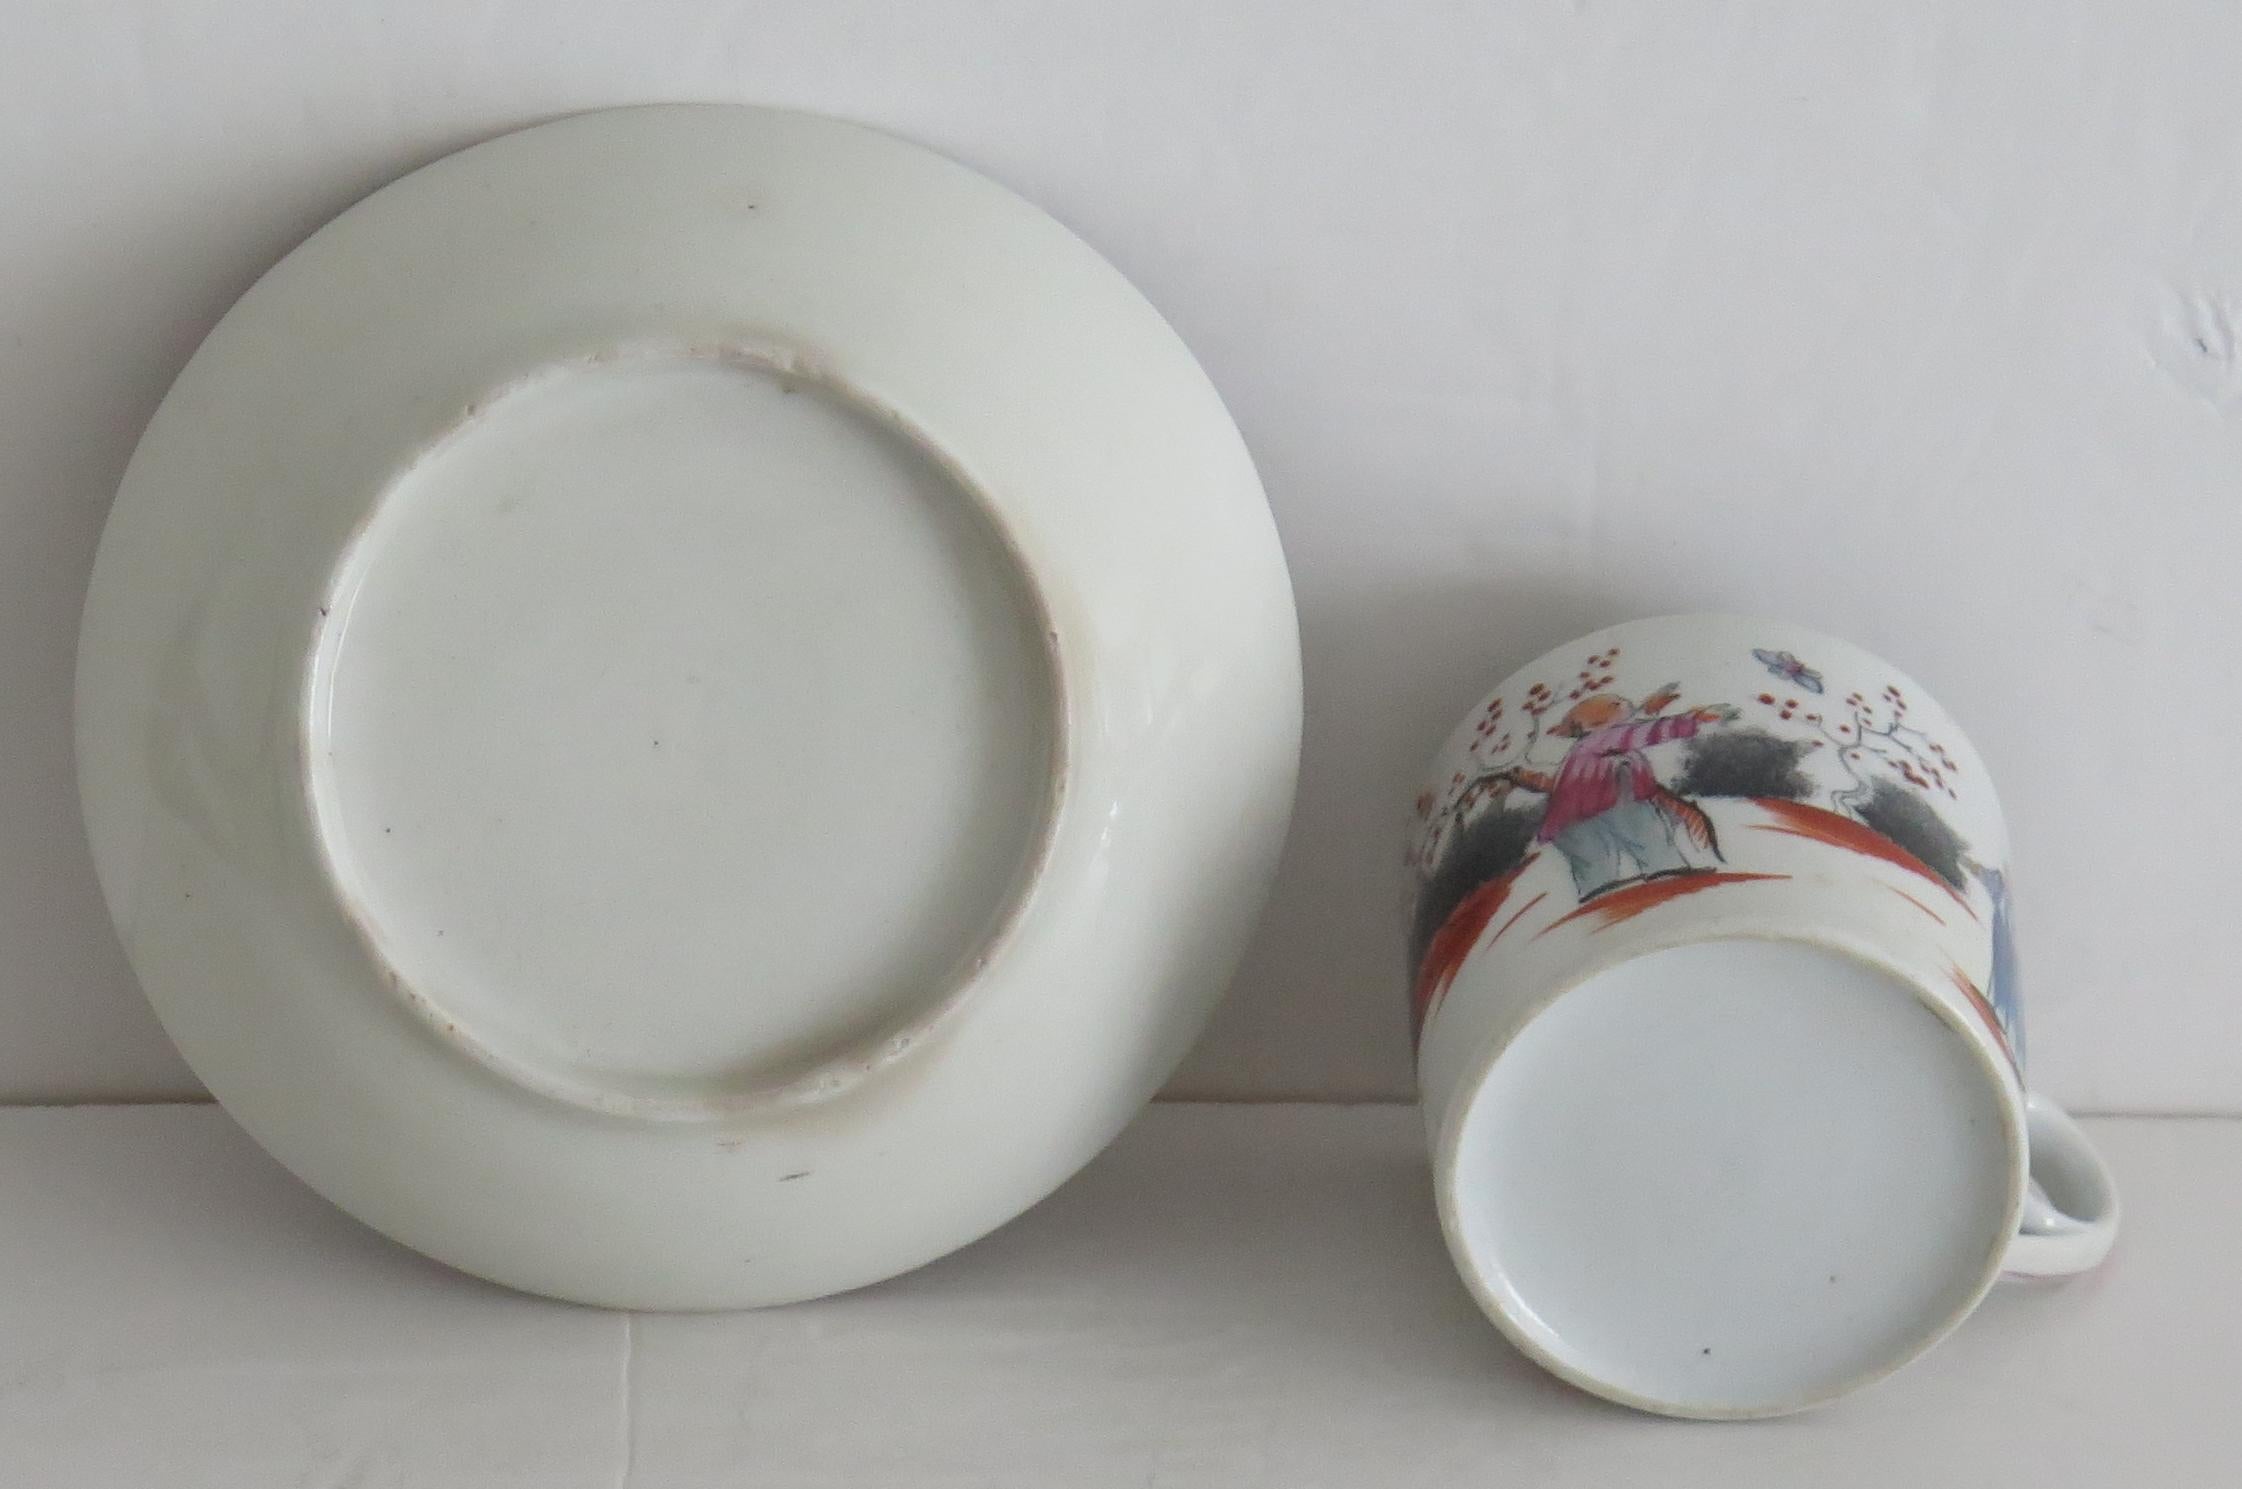 Early New Hall Porcelain Coffee Can & Saucer Duo Chinese Pattern 421, circa 1800 For Sale 5